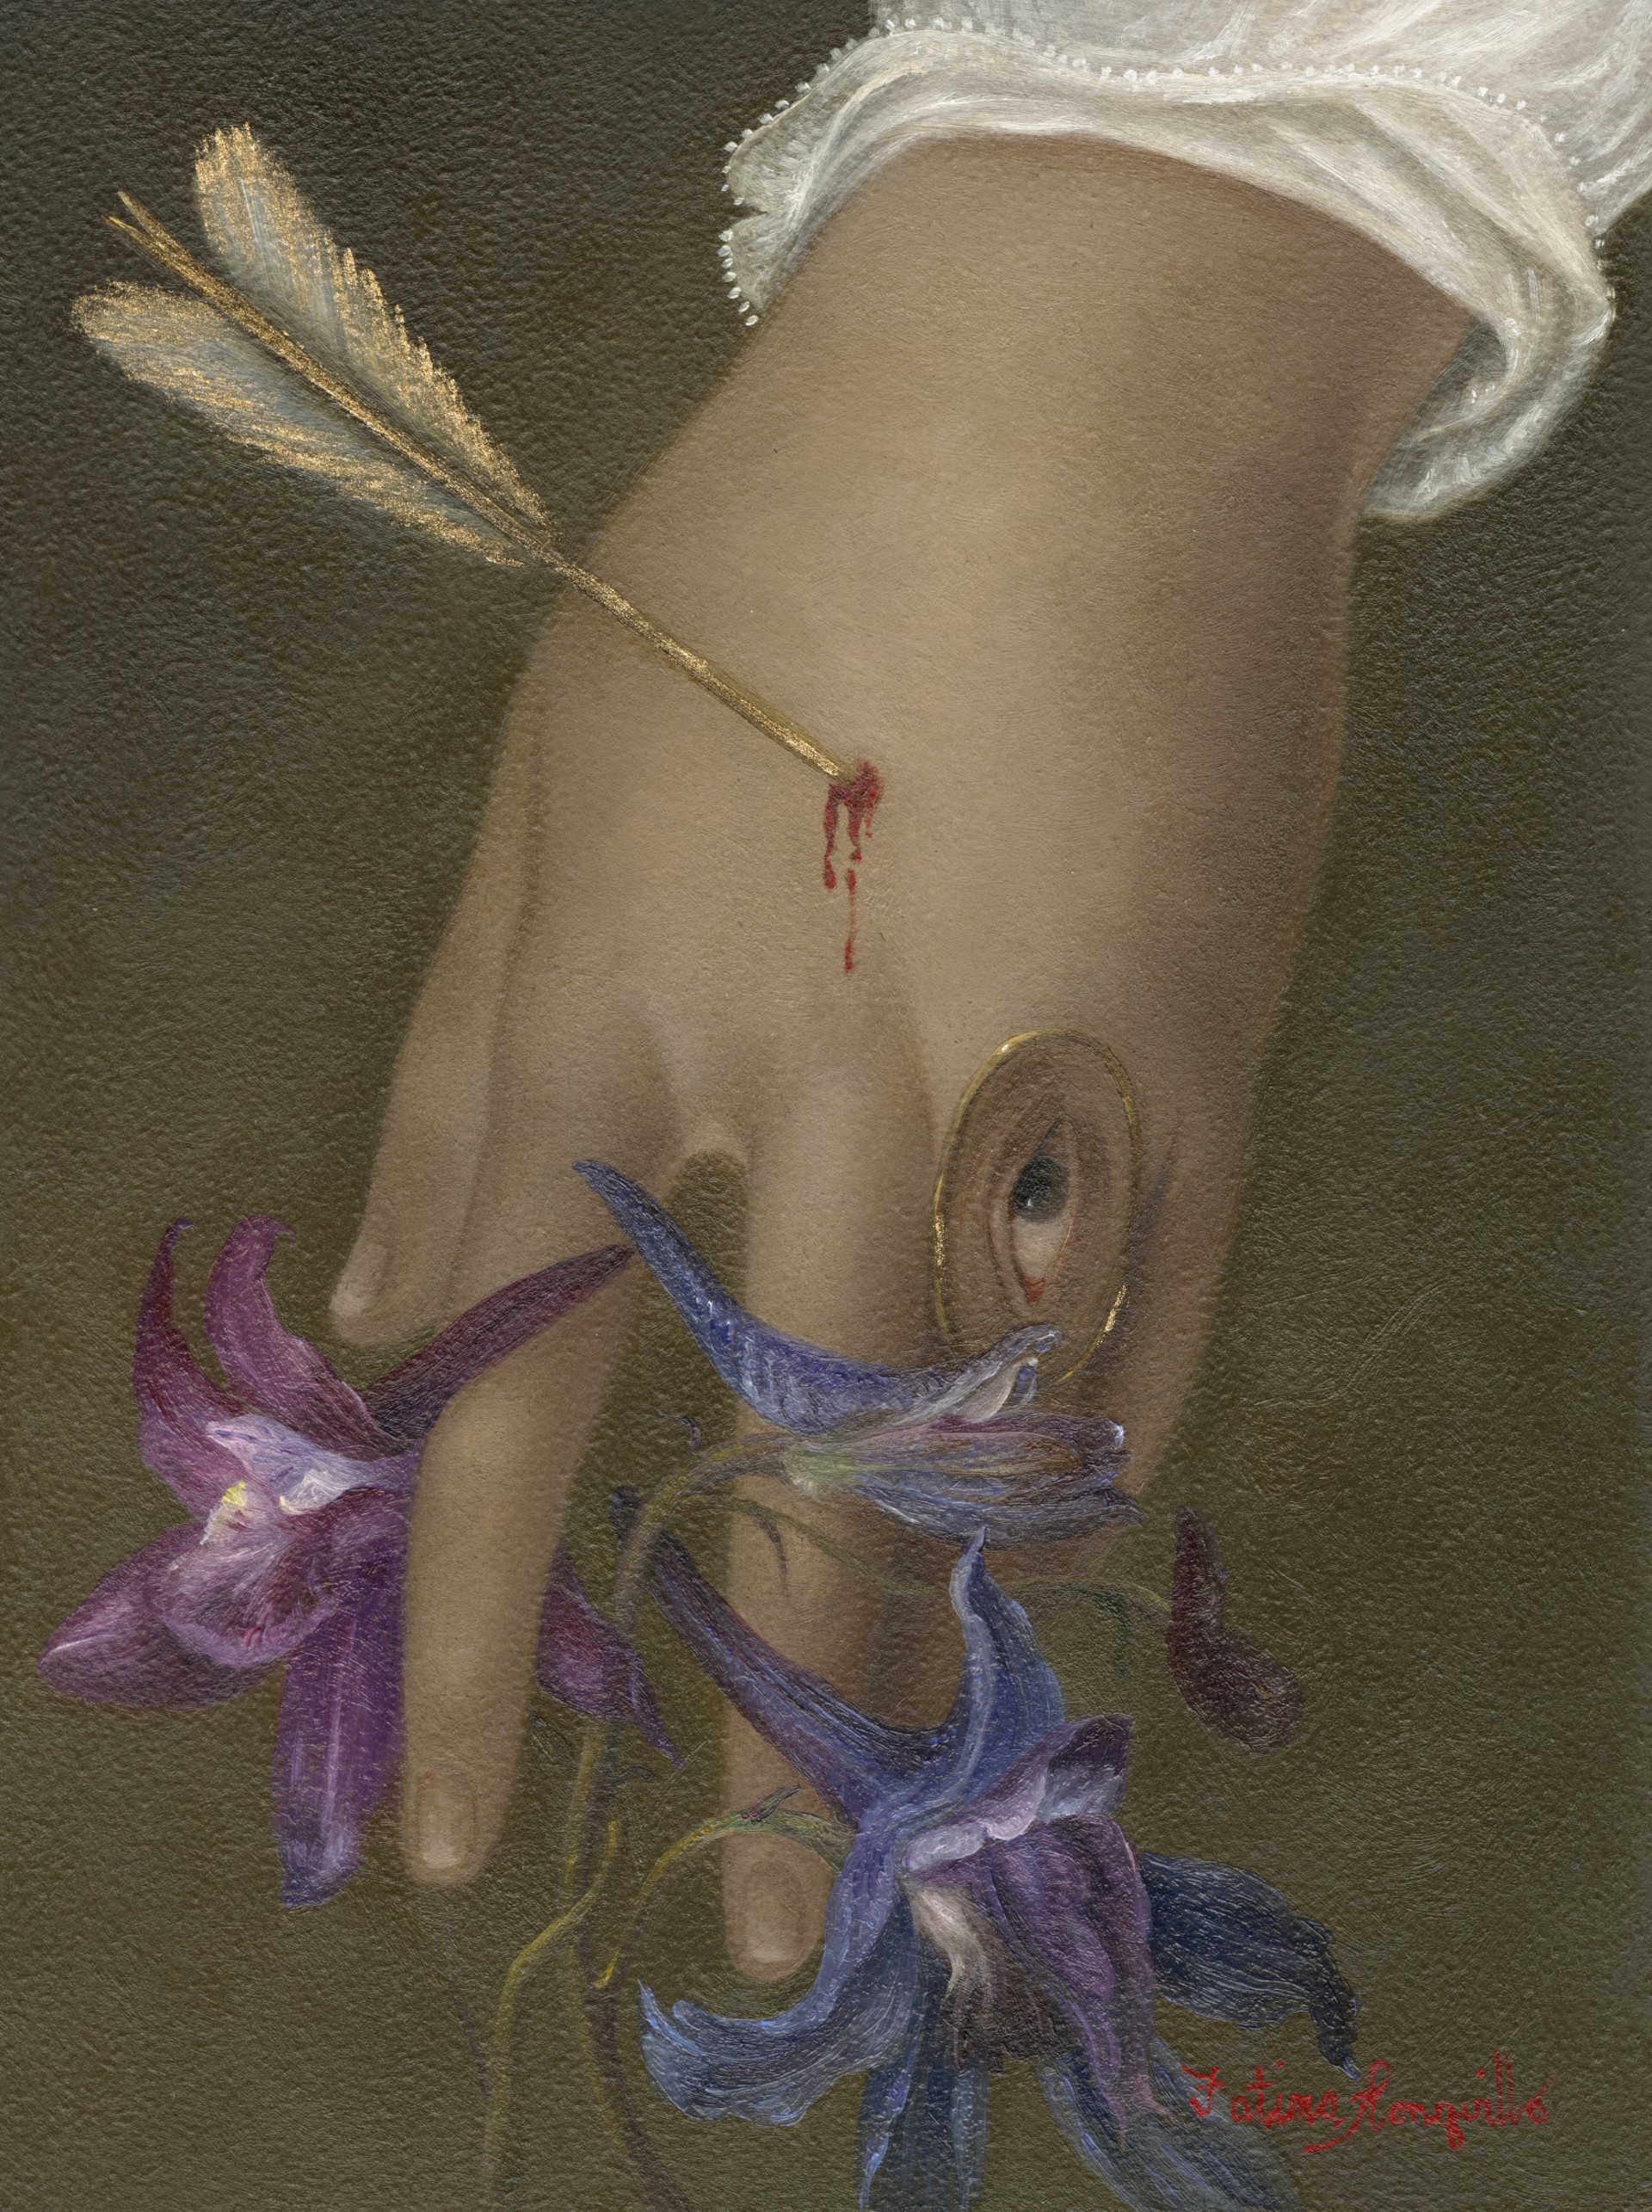 Alas! Alas! Wounded Hand with Delphinium and Lover's Eye by Fatima Ronquillo